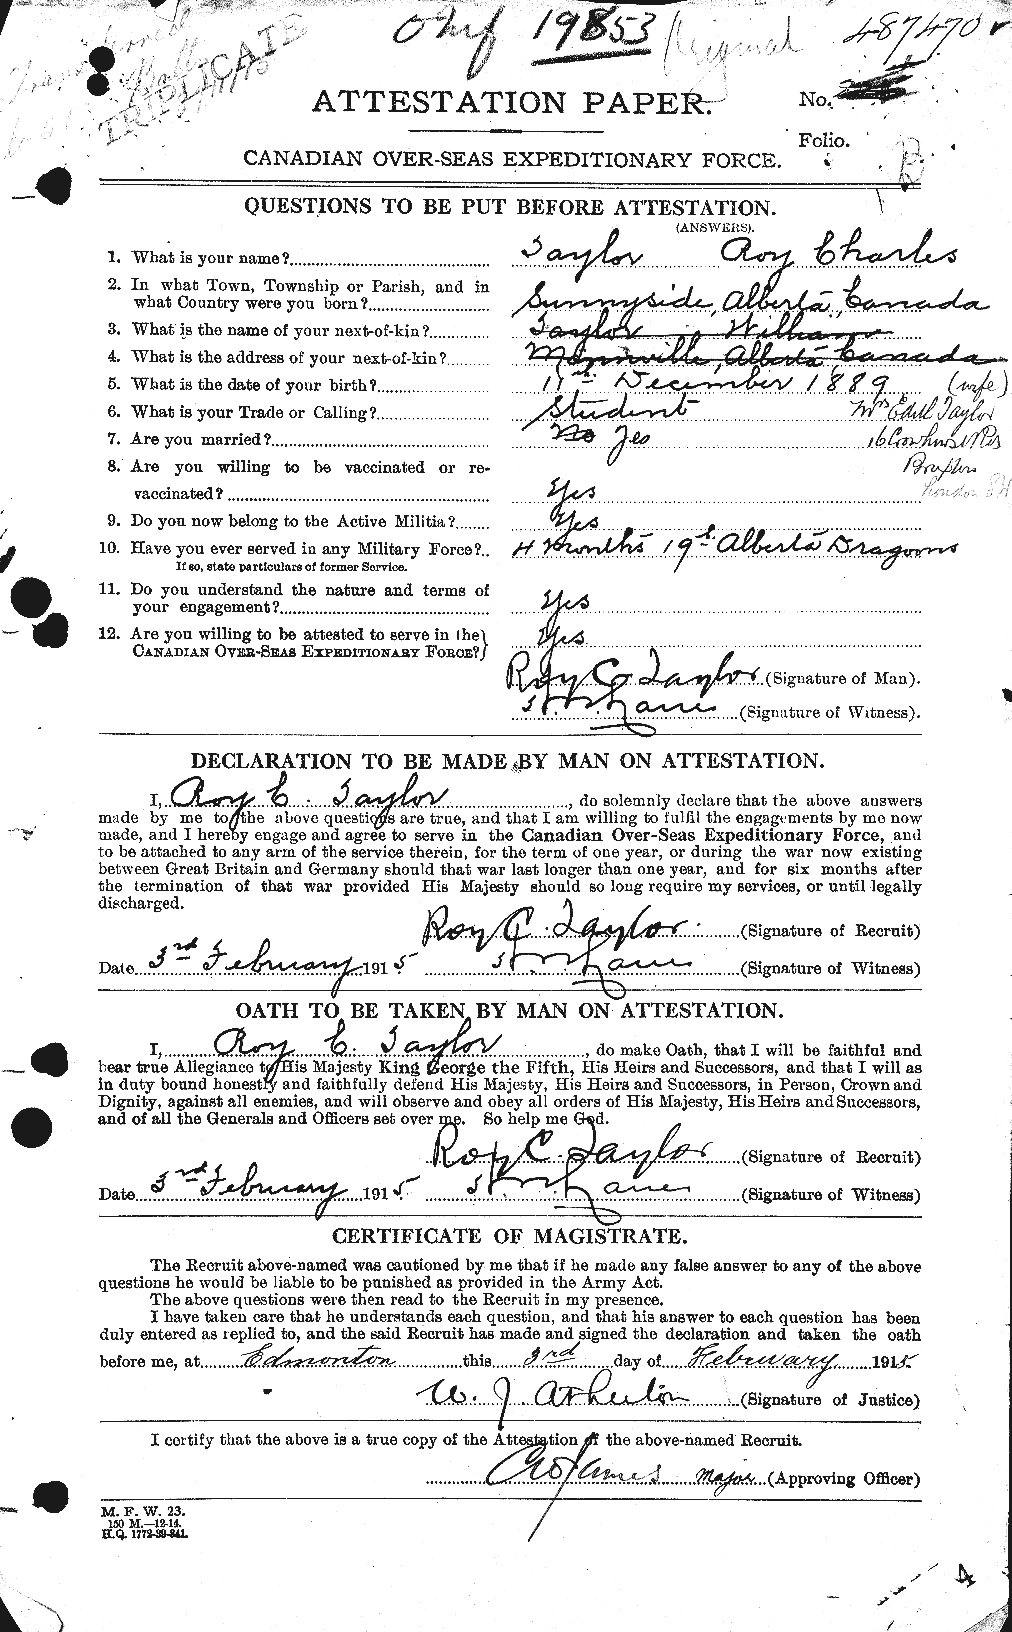 Personnel Records of the First World War - CEF 627527a